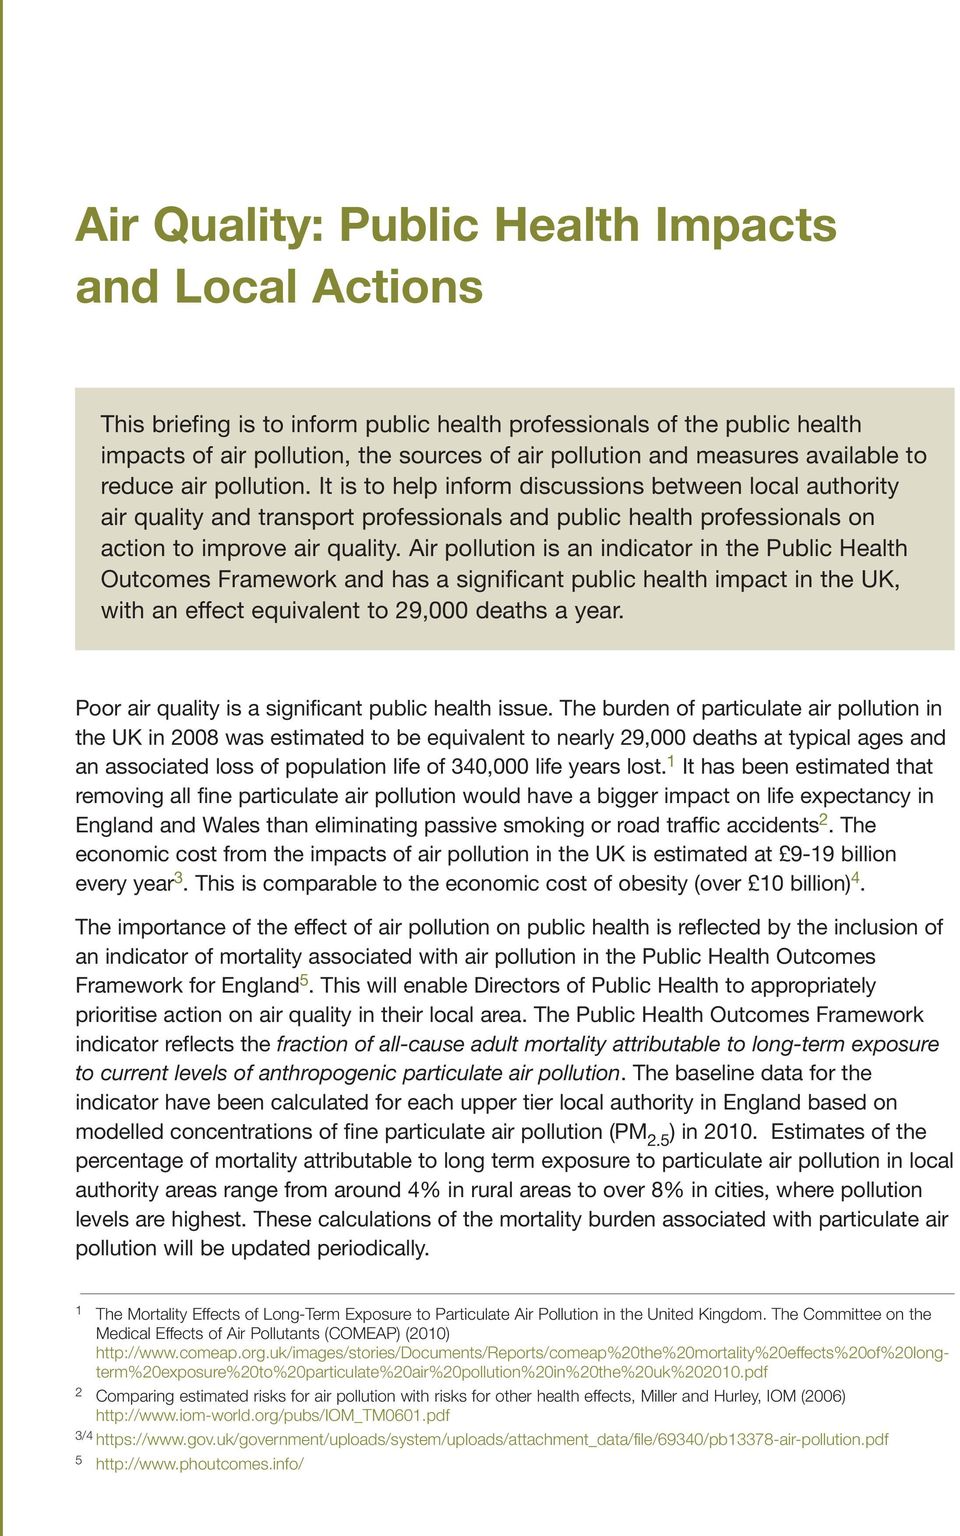 Air pollution is an indicator in the Public Health Outcomes Framework and has a significant public health impact in the UK, with an effect equivalent to 29,000 deaths a year.